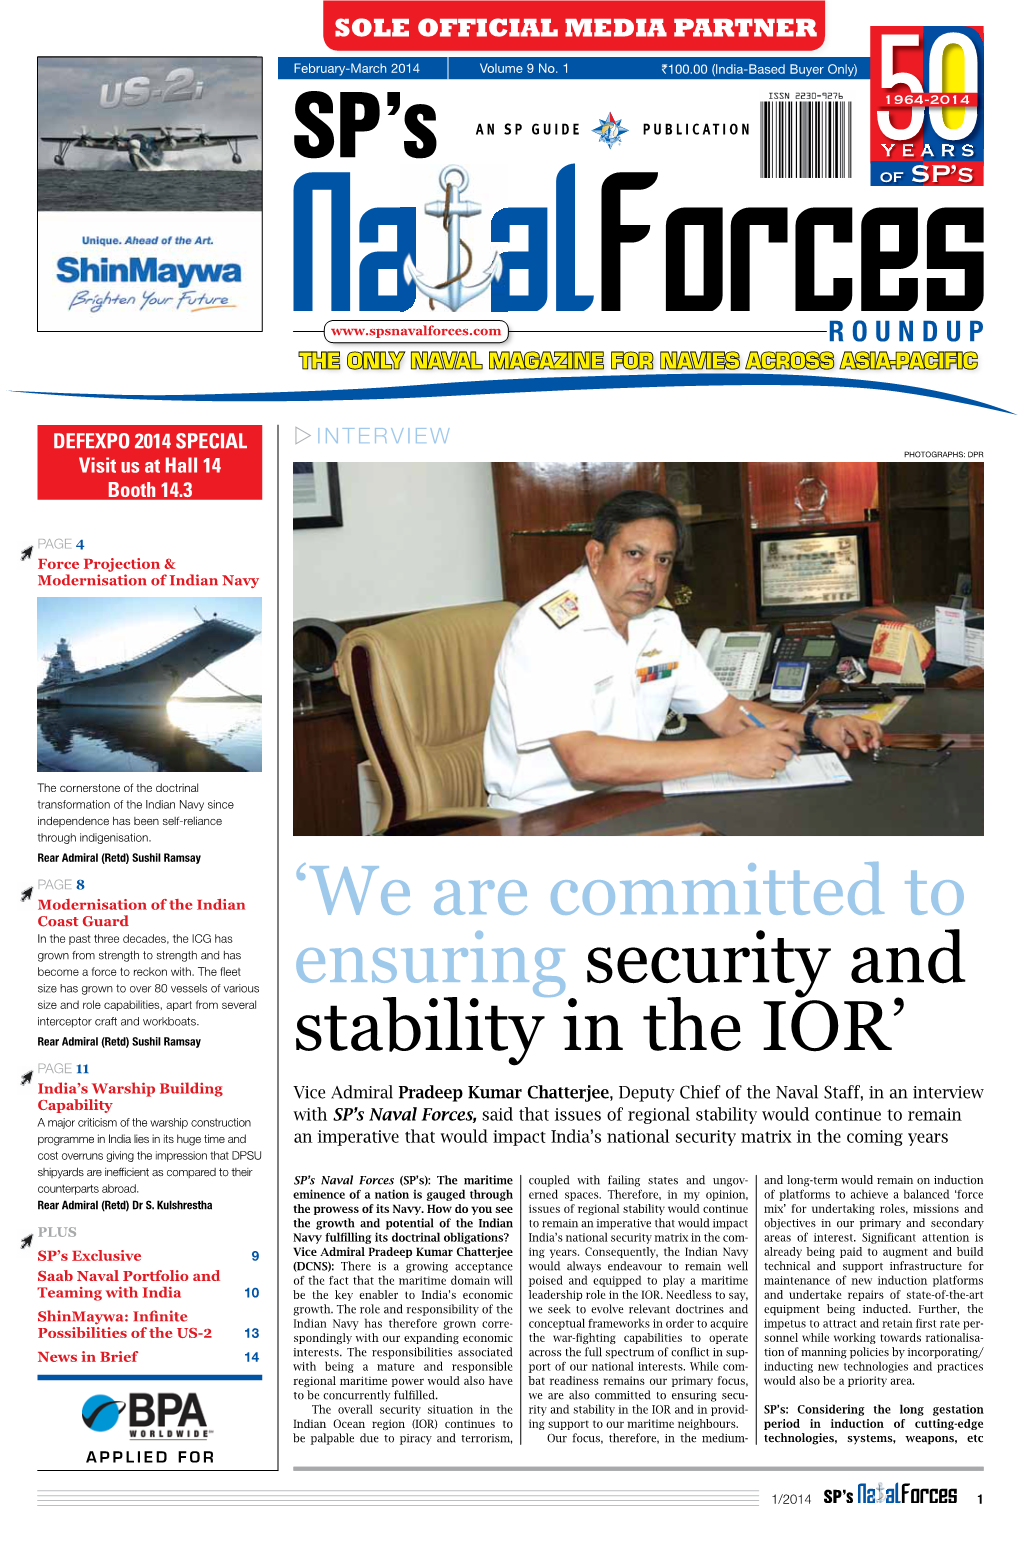 'We Are Committed to Ensuring Security and Stability in the IOR'